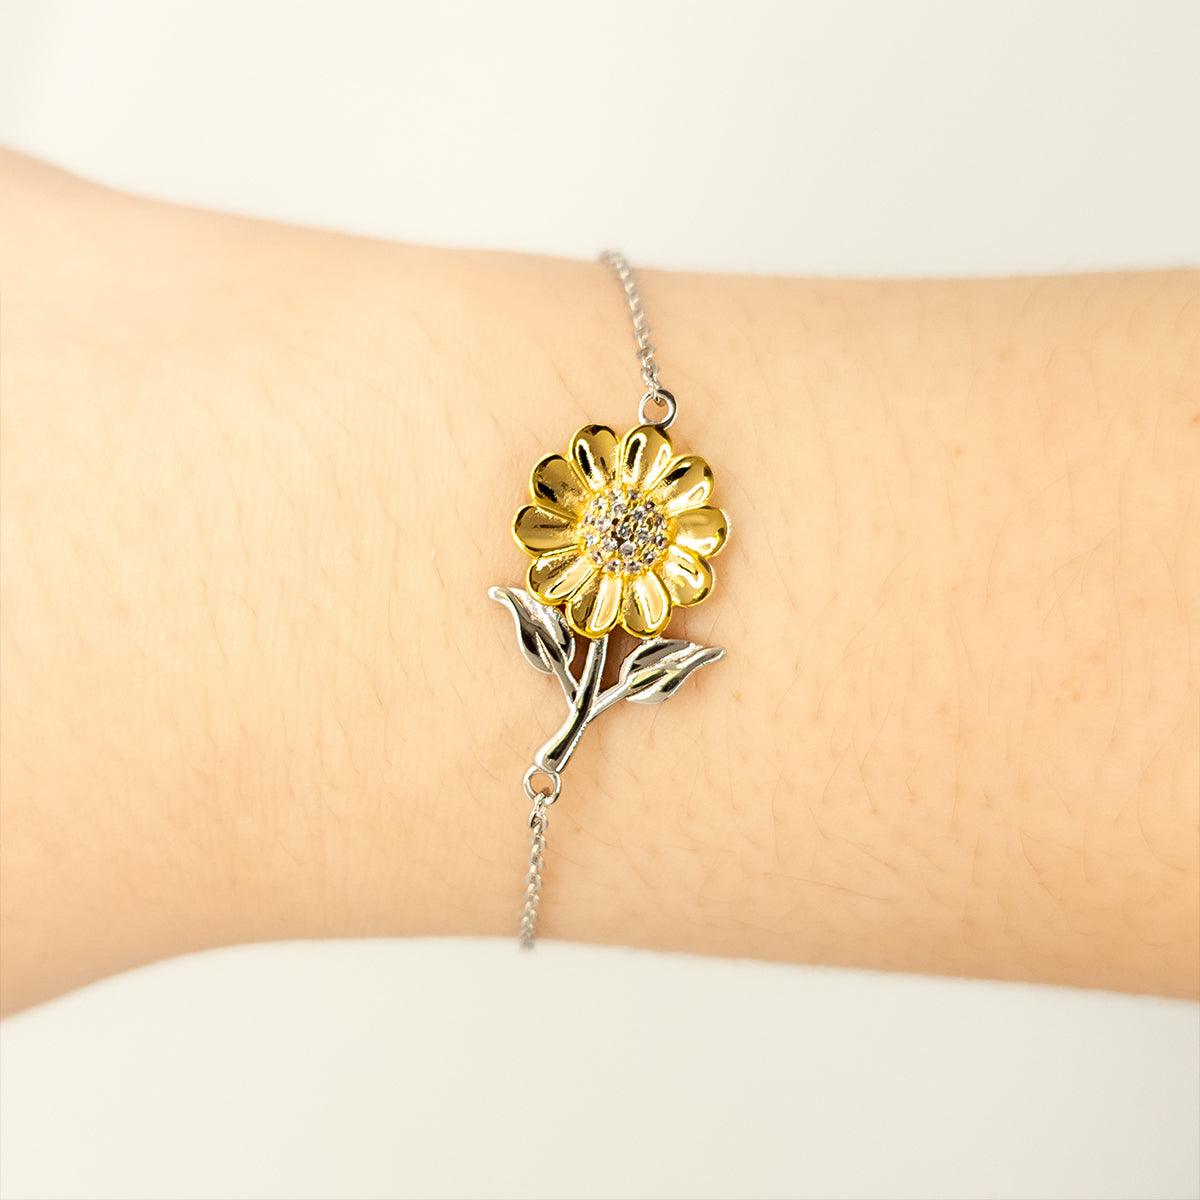 Motivational Mommy Sunflower Bracelet - I can promise to love you for the rest of my life, Birthday, Christmas Holiday Jewelry Gift - Mallard Moon Gift Shop